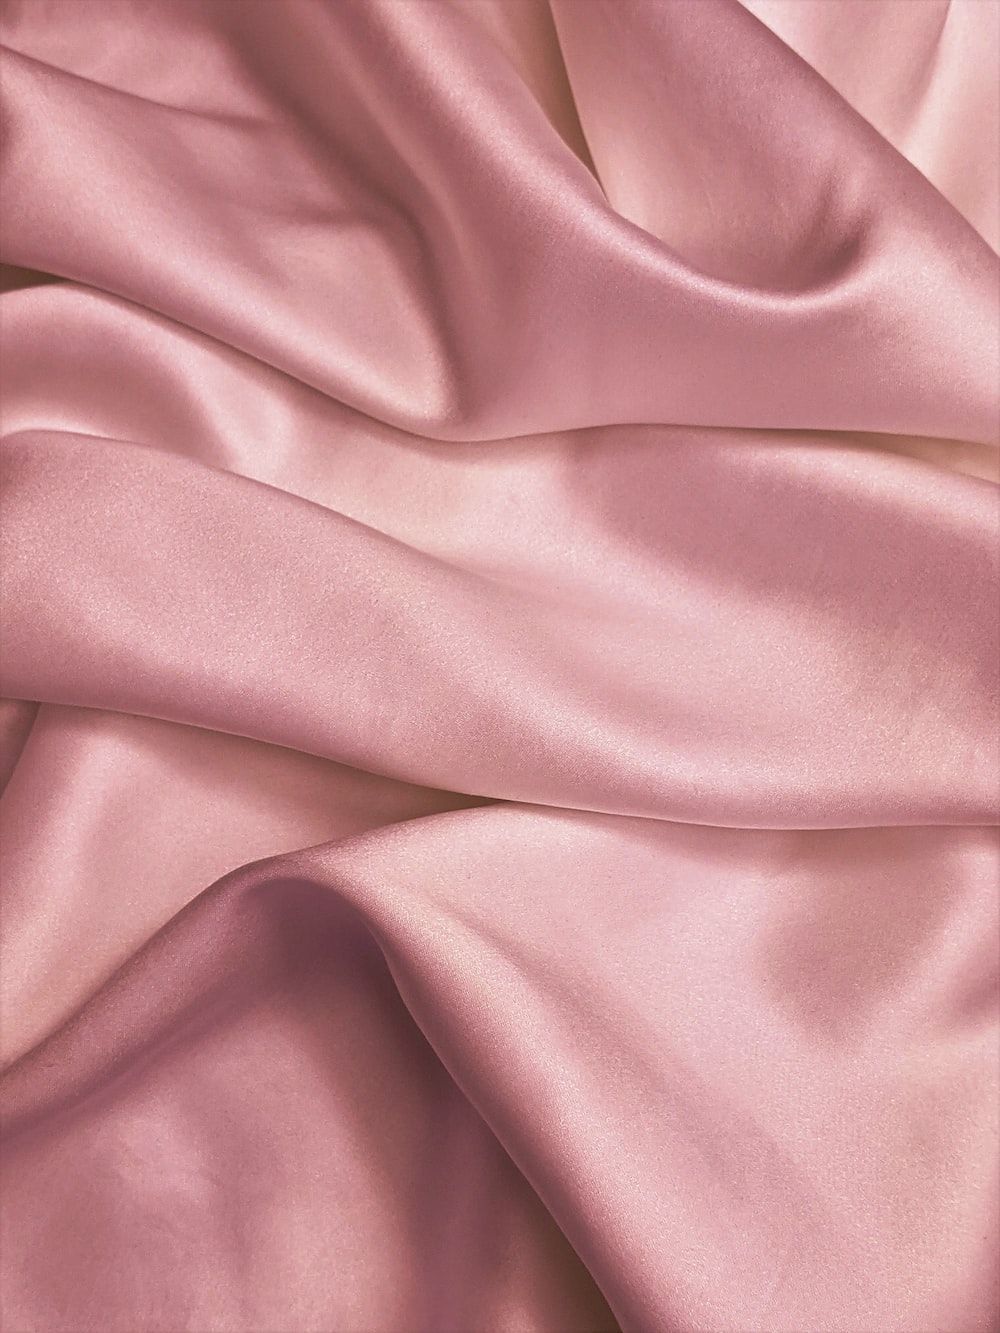 Pink Silk Picture. Download Free Image